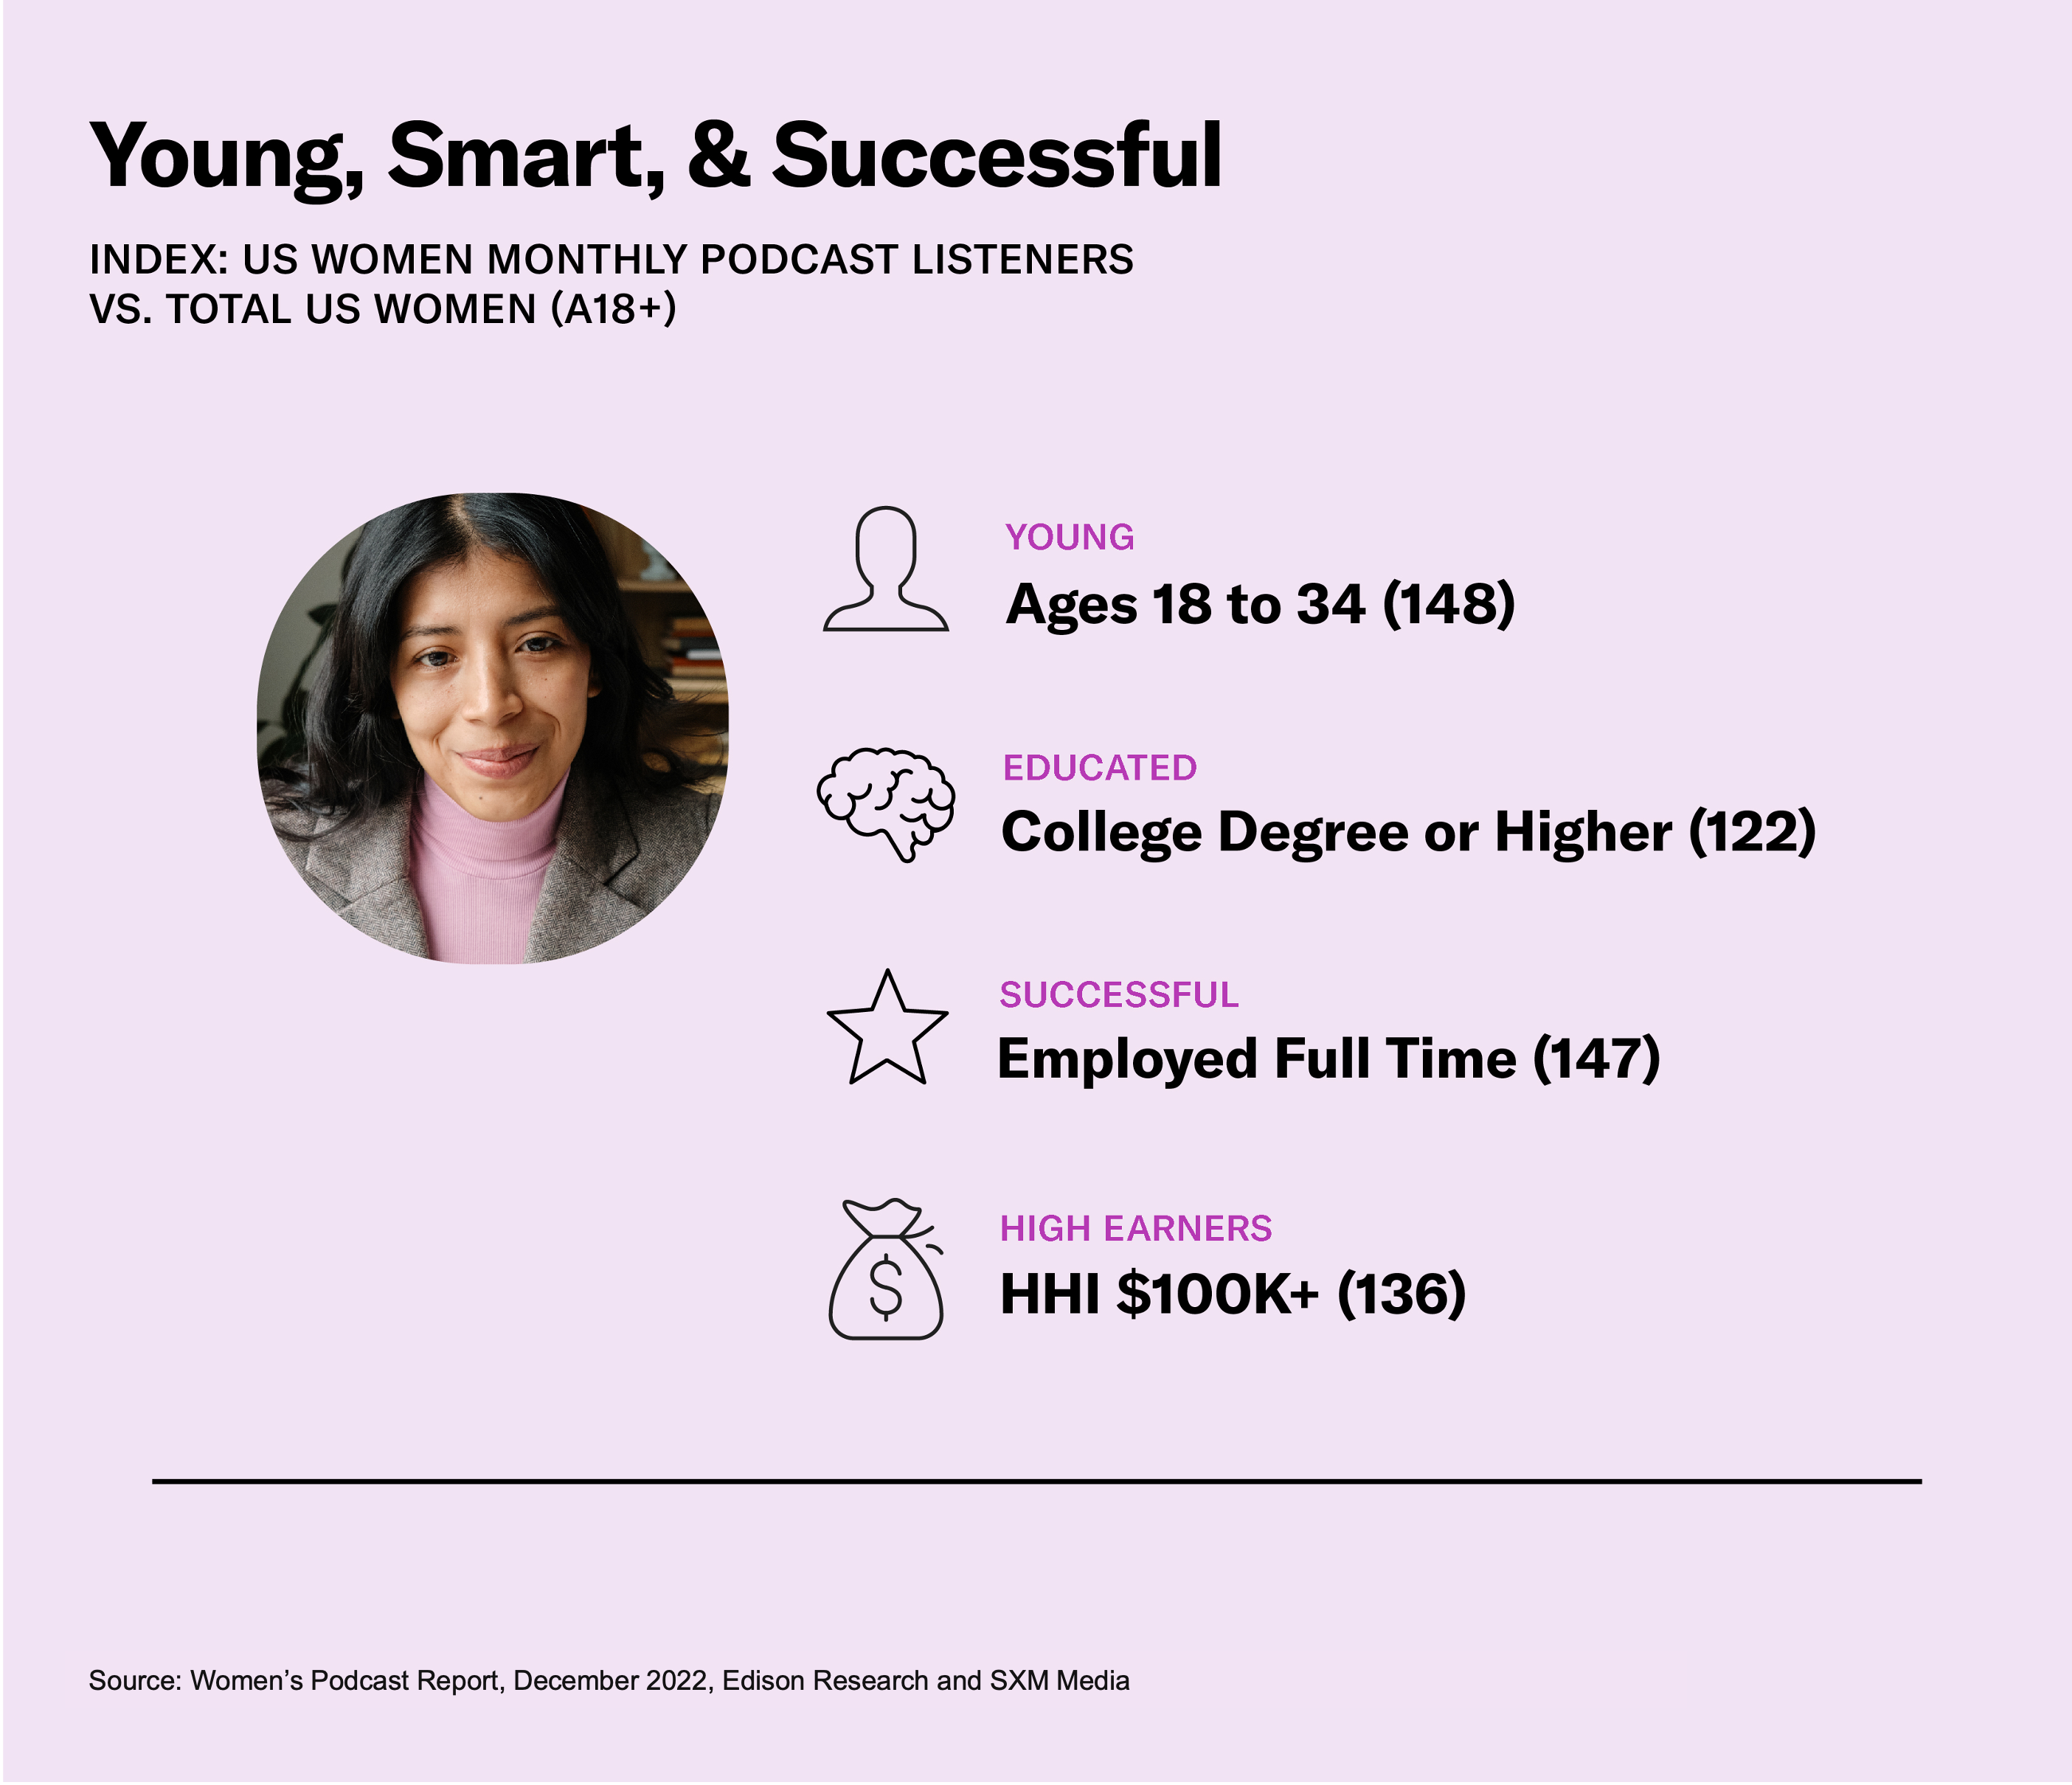 Female Podcast Listeners are Young, Smart, and Successful